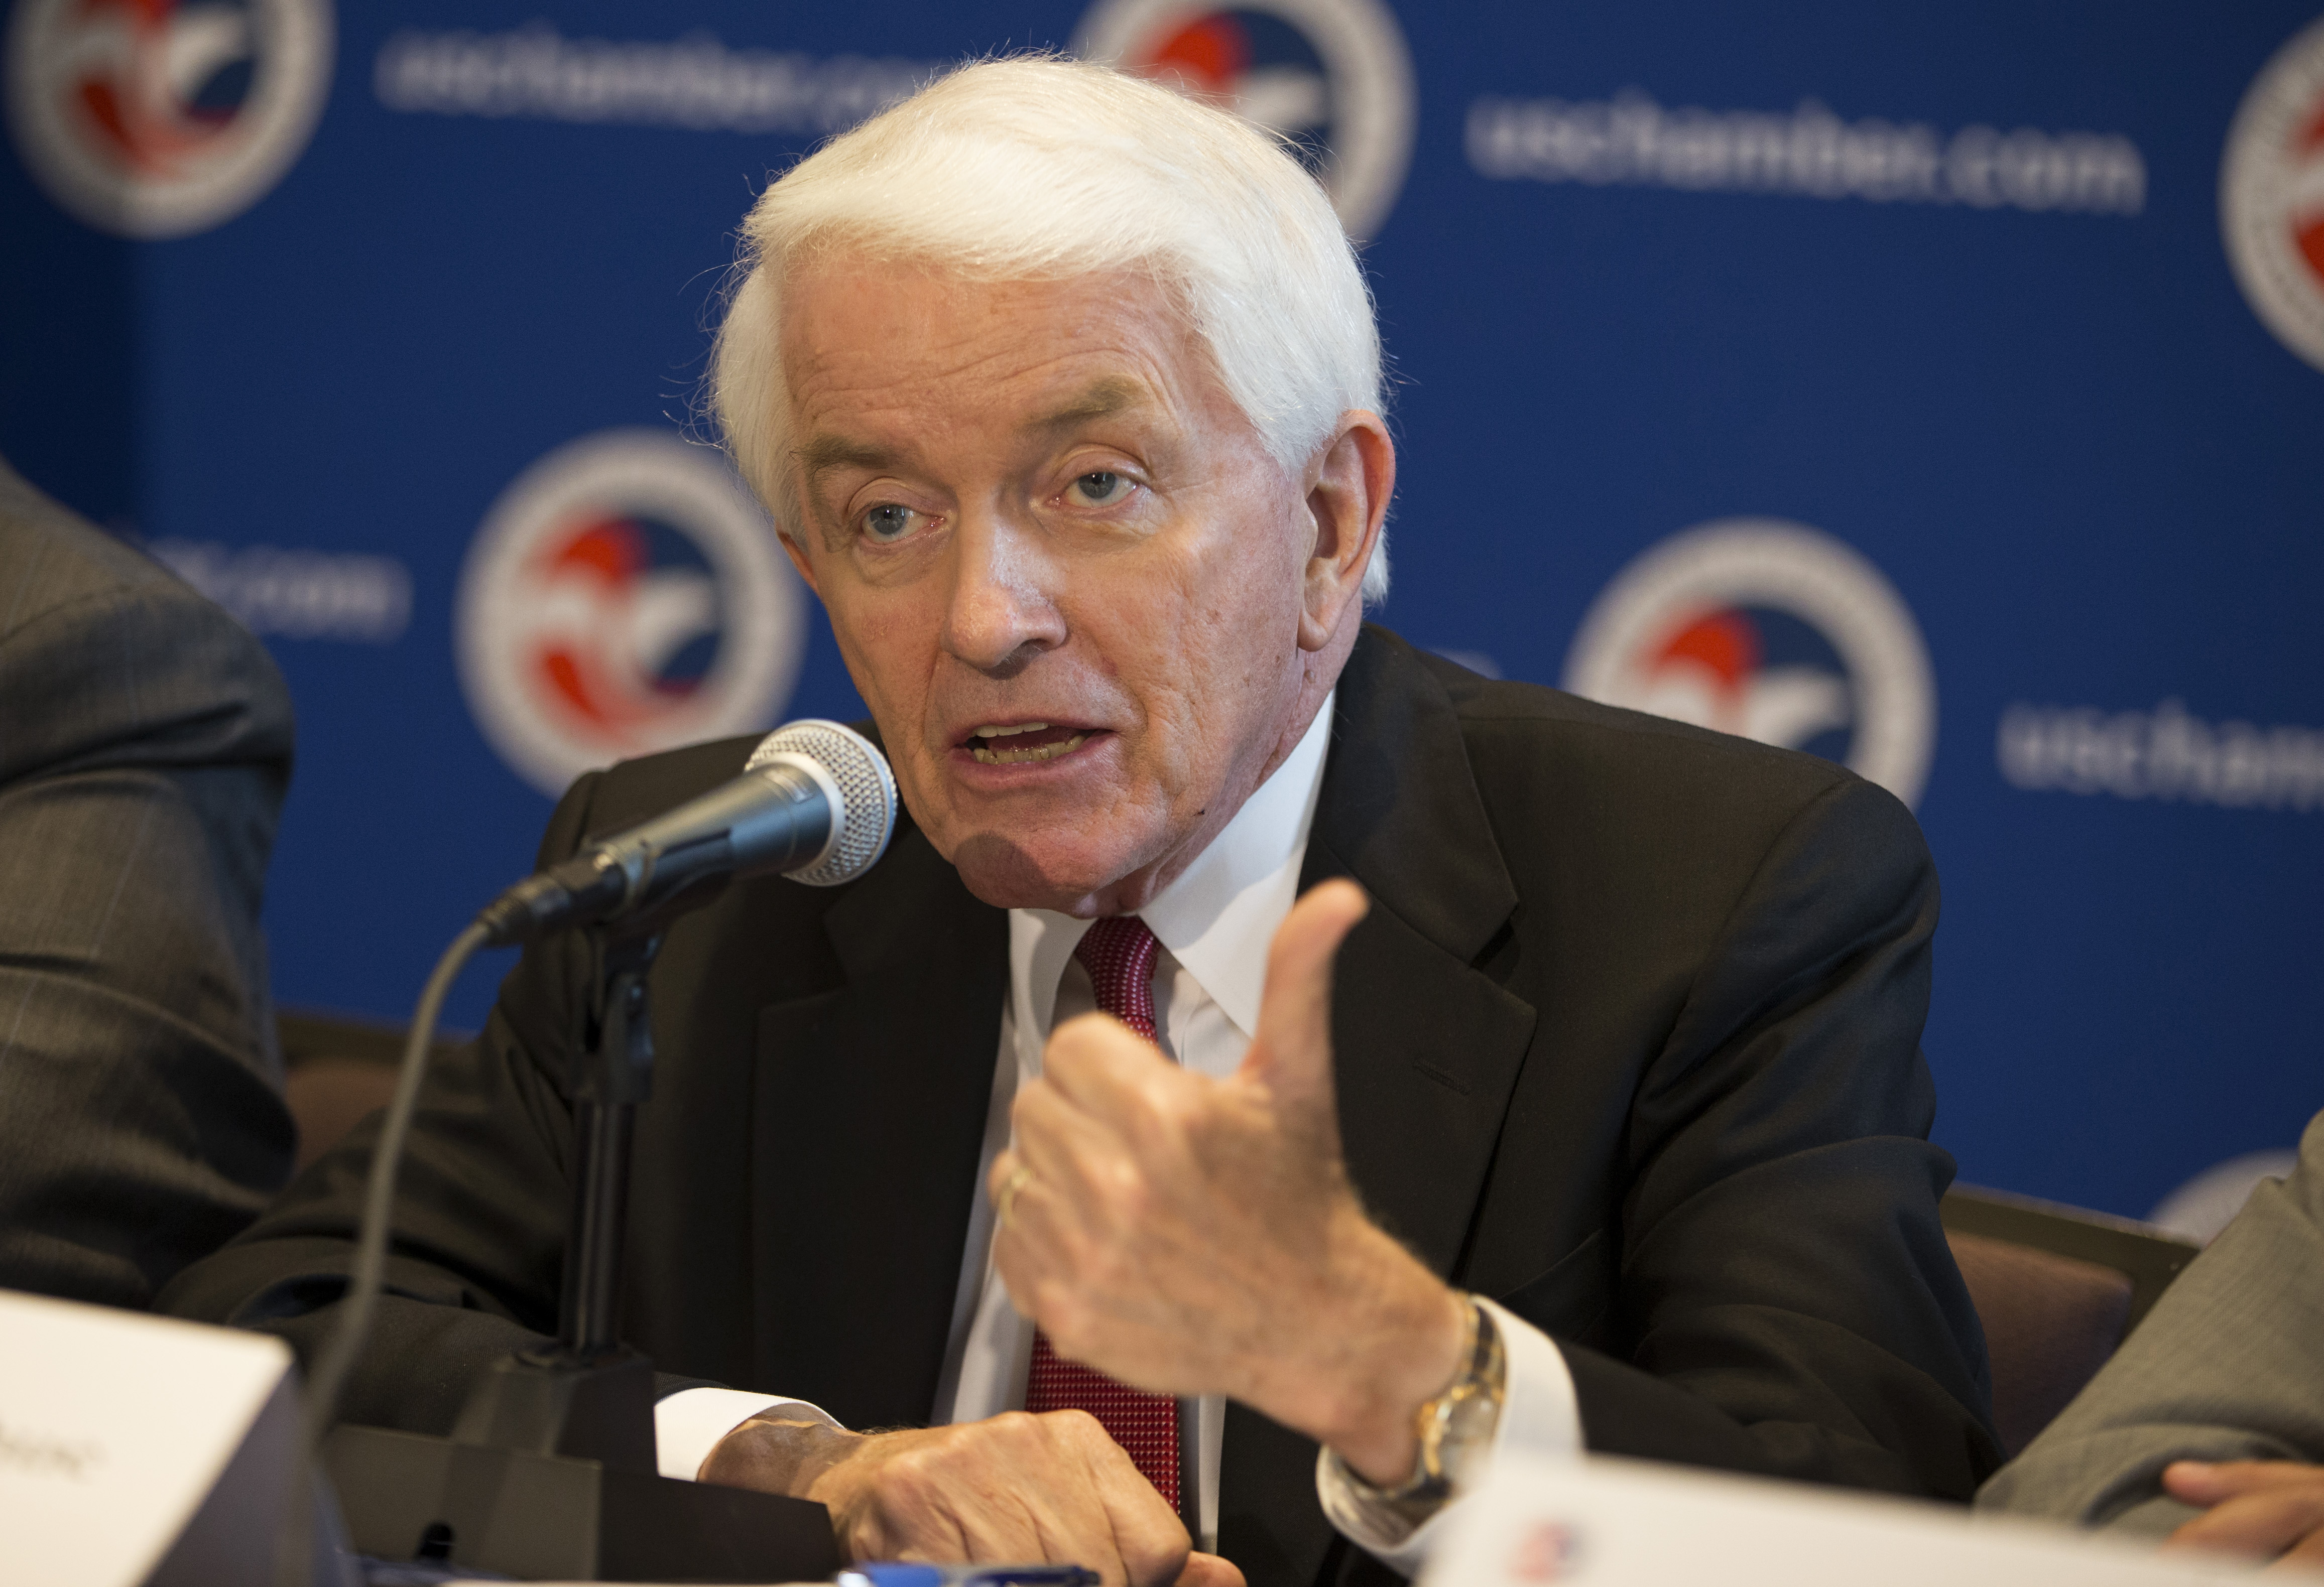 U.S. Chamber of Commerce President and CEO Tom Donohue speaks during a news conference at the U.S. Chamber of Commerce in Washington on July 9, 2014. (Evan Vucci—AP)